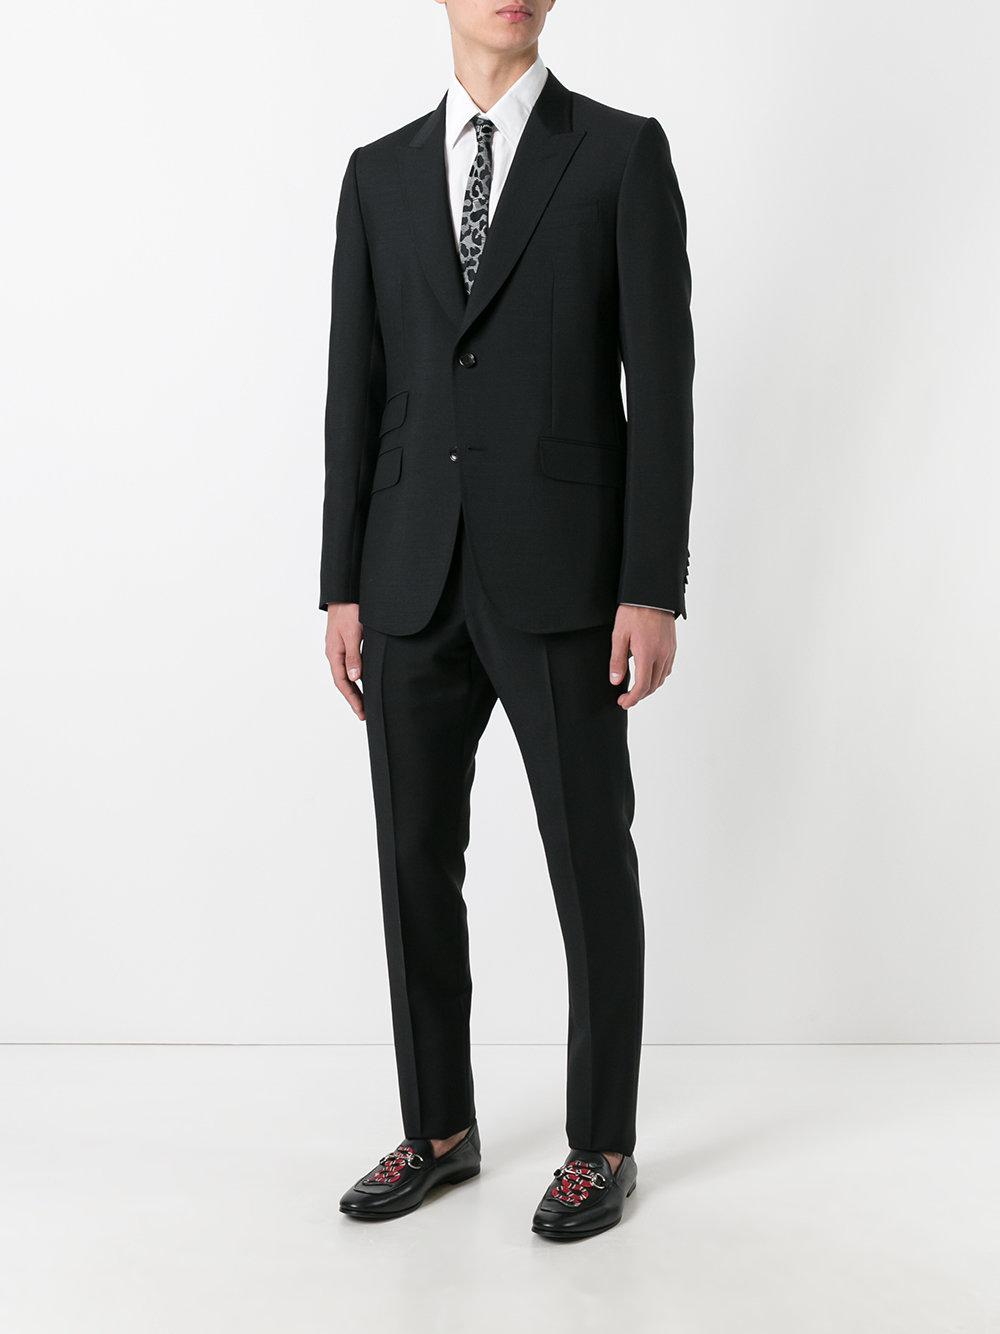 Gucci Wool Classic Two Piece Suit in Black for Men - Lyst